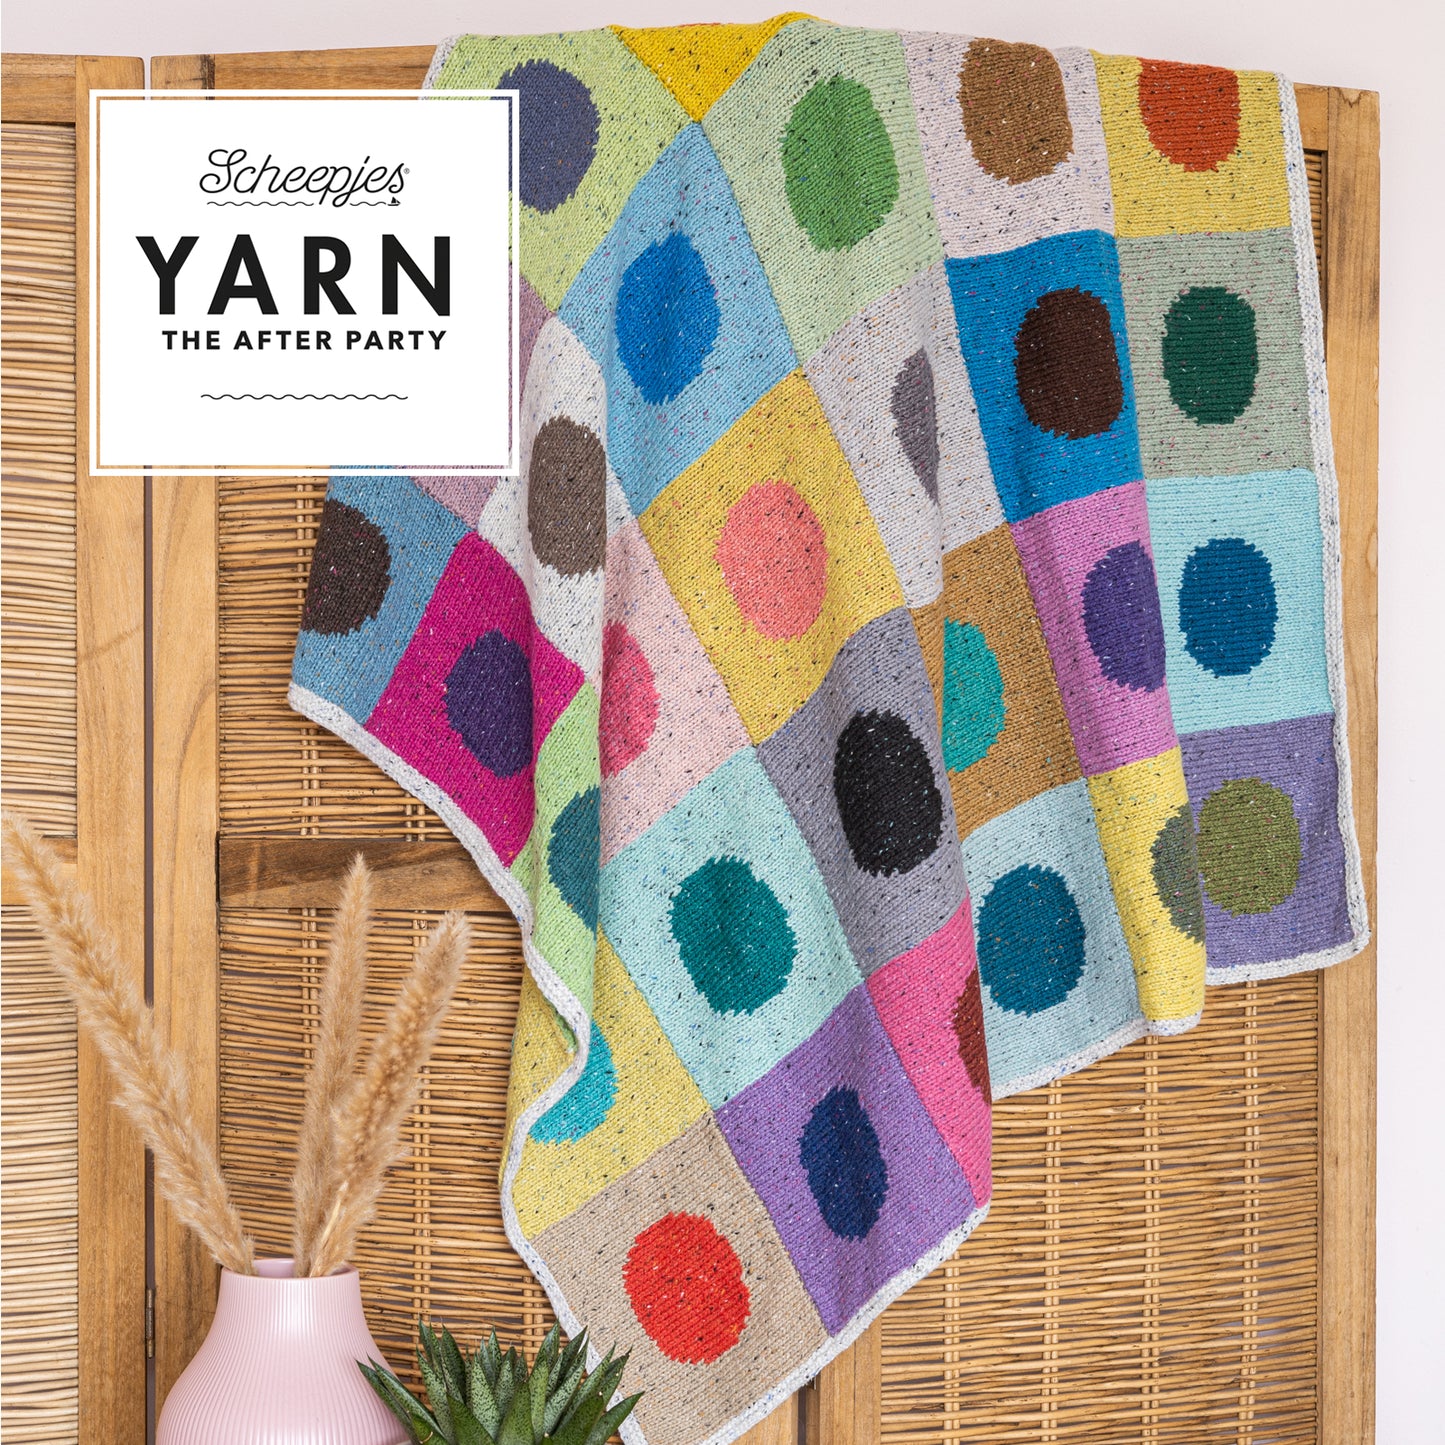 Scheepjes Yarn The After Party no. 147 - Whole Lot of Dots Blanket (booklet) - (Knit)